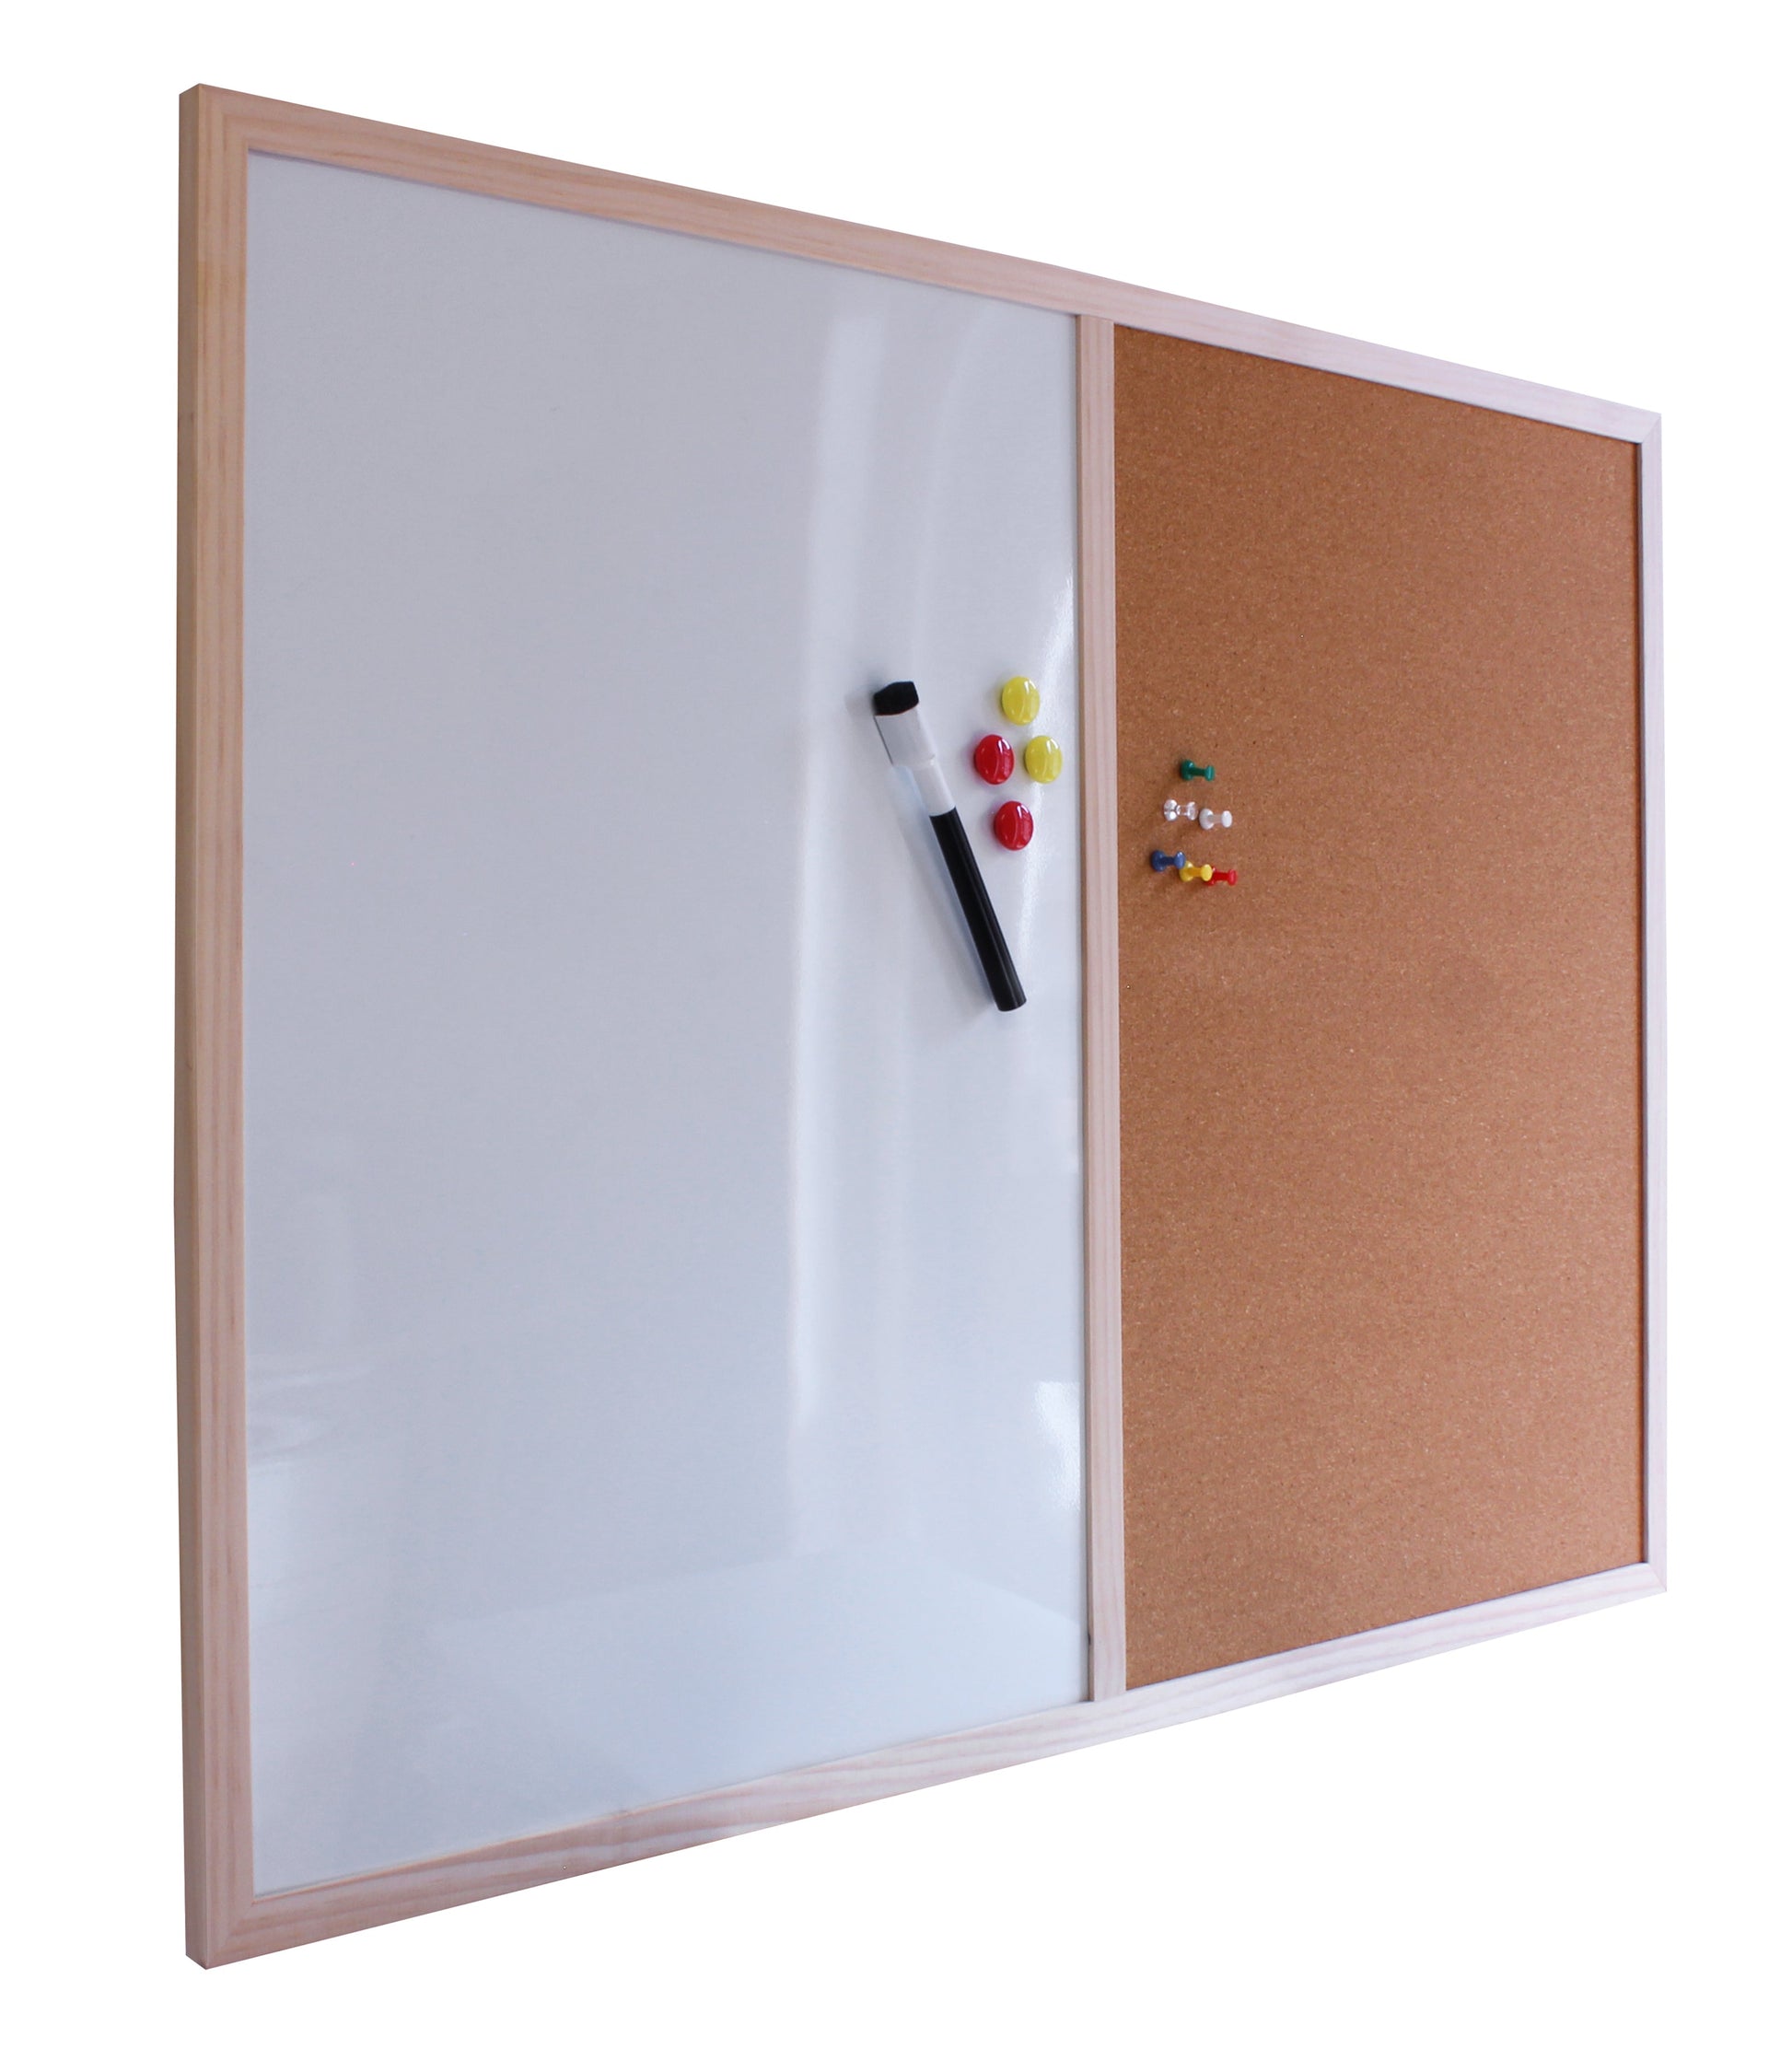 Angled view of a 60x80cm combination noticeboard, half white dry erase board with a black marker and colored magnets, and half cork board with pins, all encased in a light wooden frame against a white backdrop.